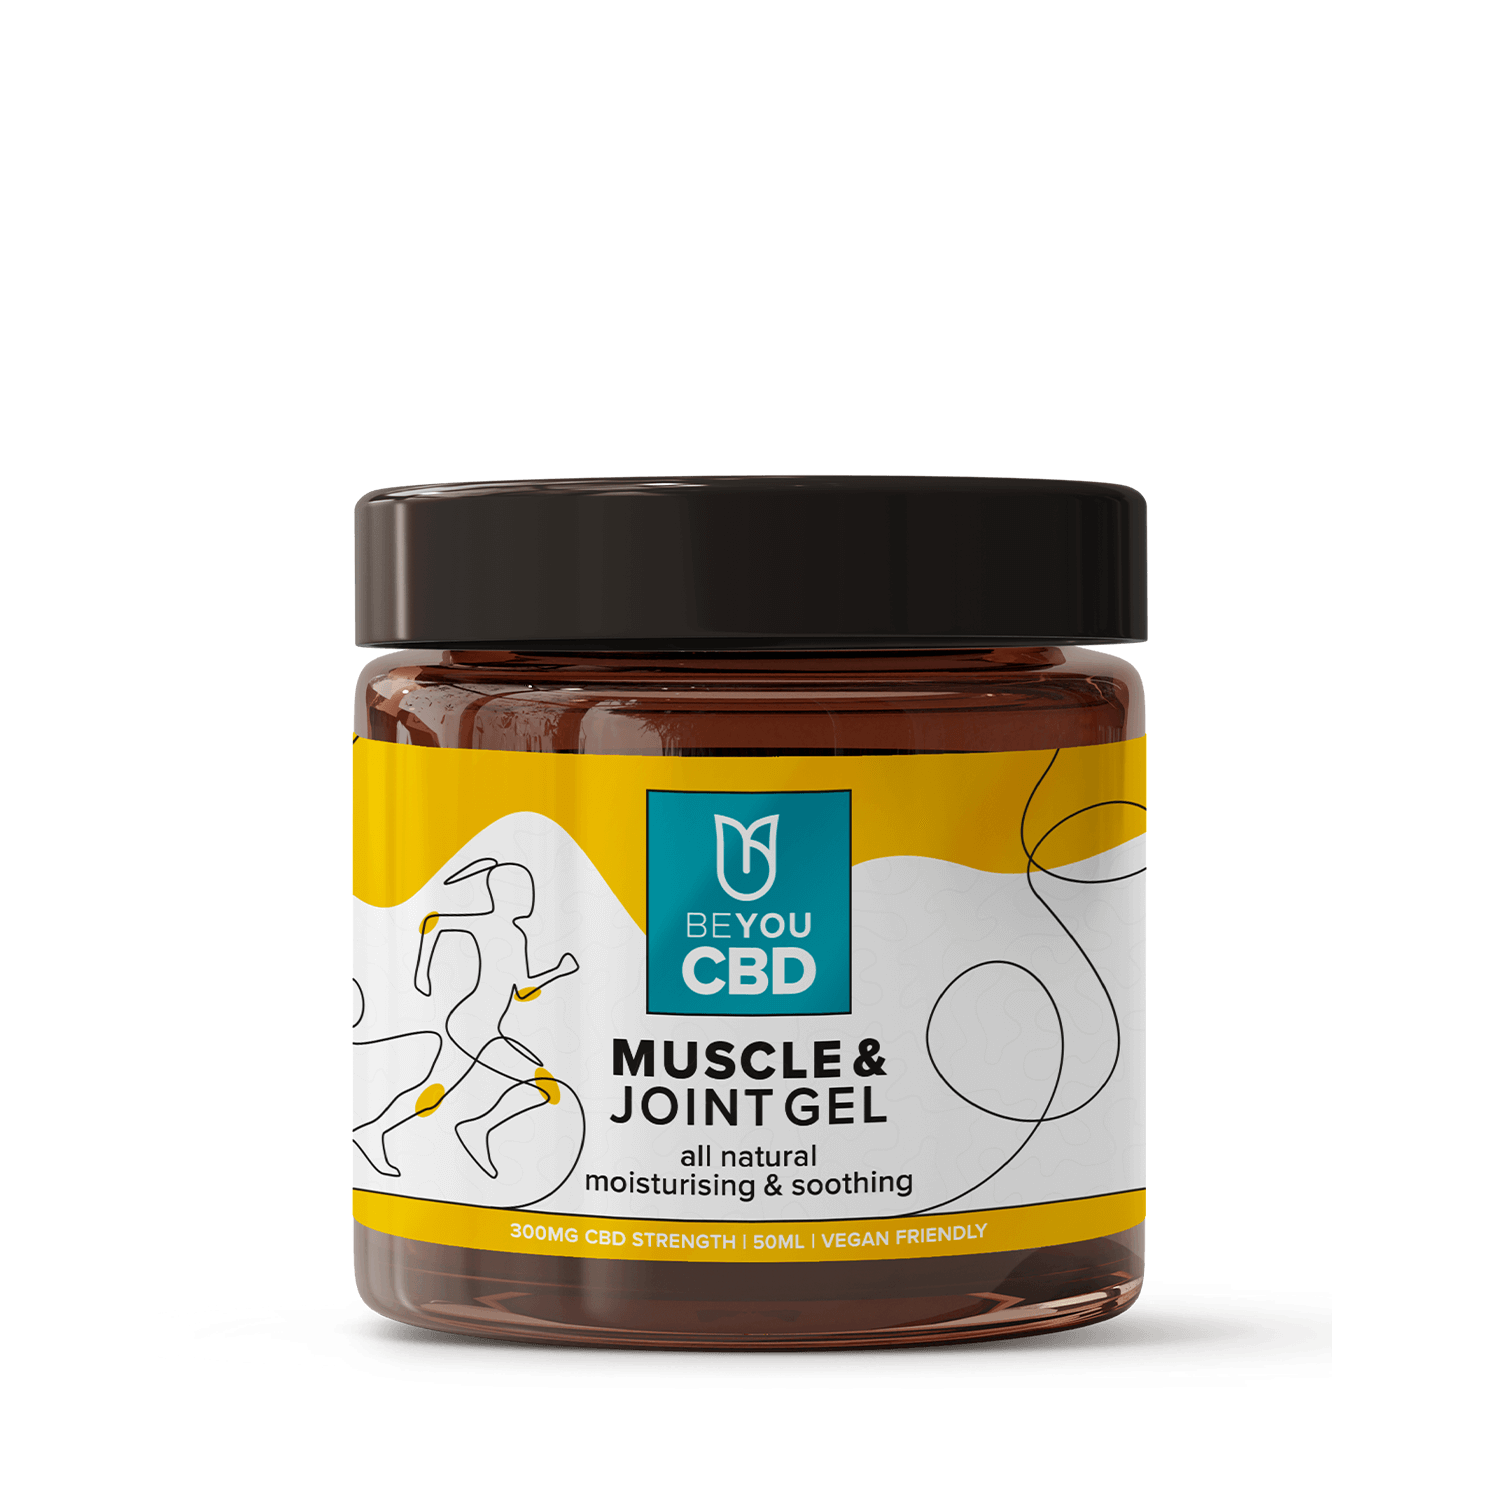 CBD muscle and joint gel for painful muscles and joints from arthritis